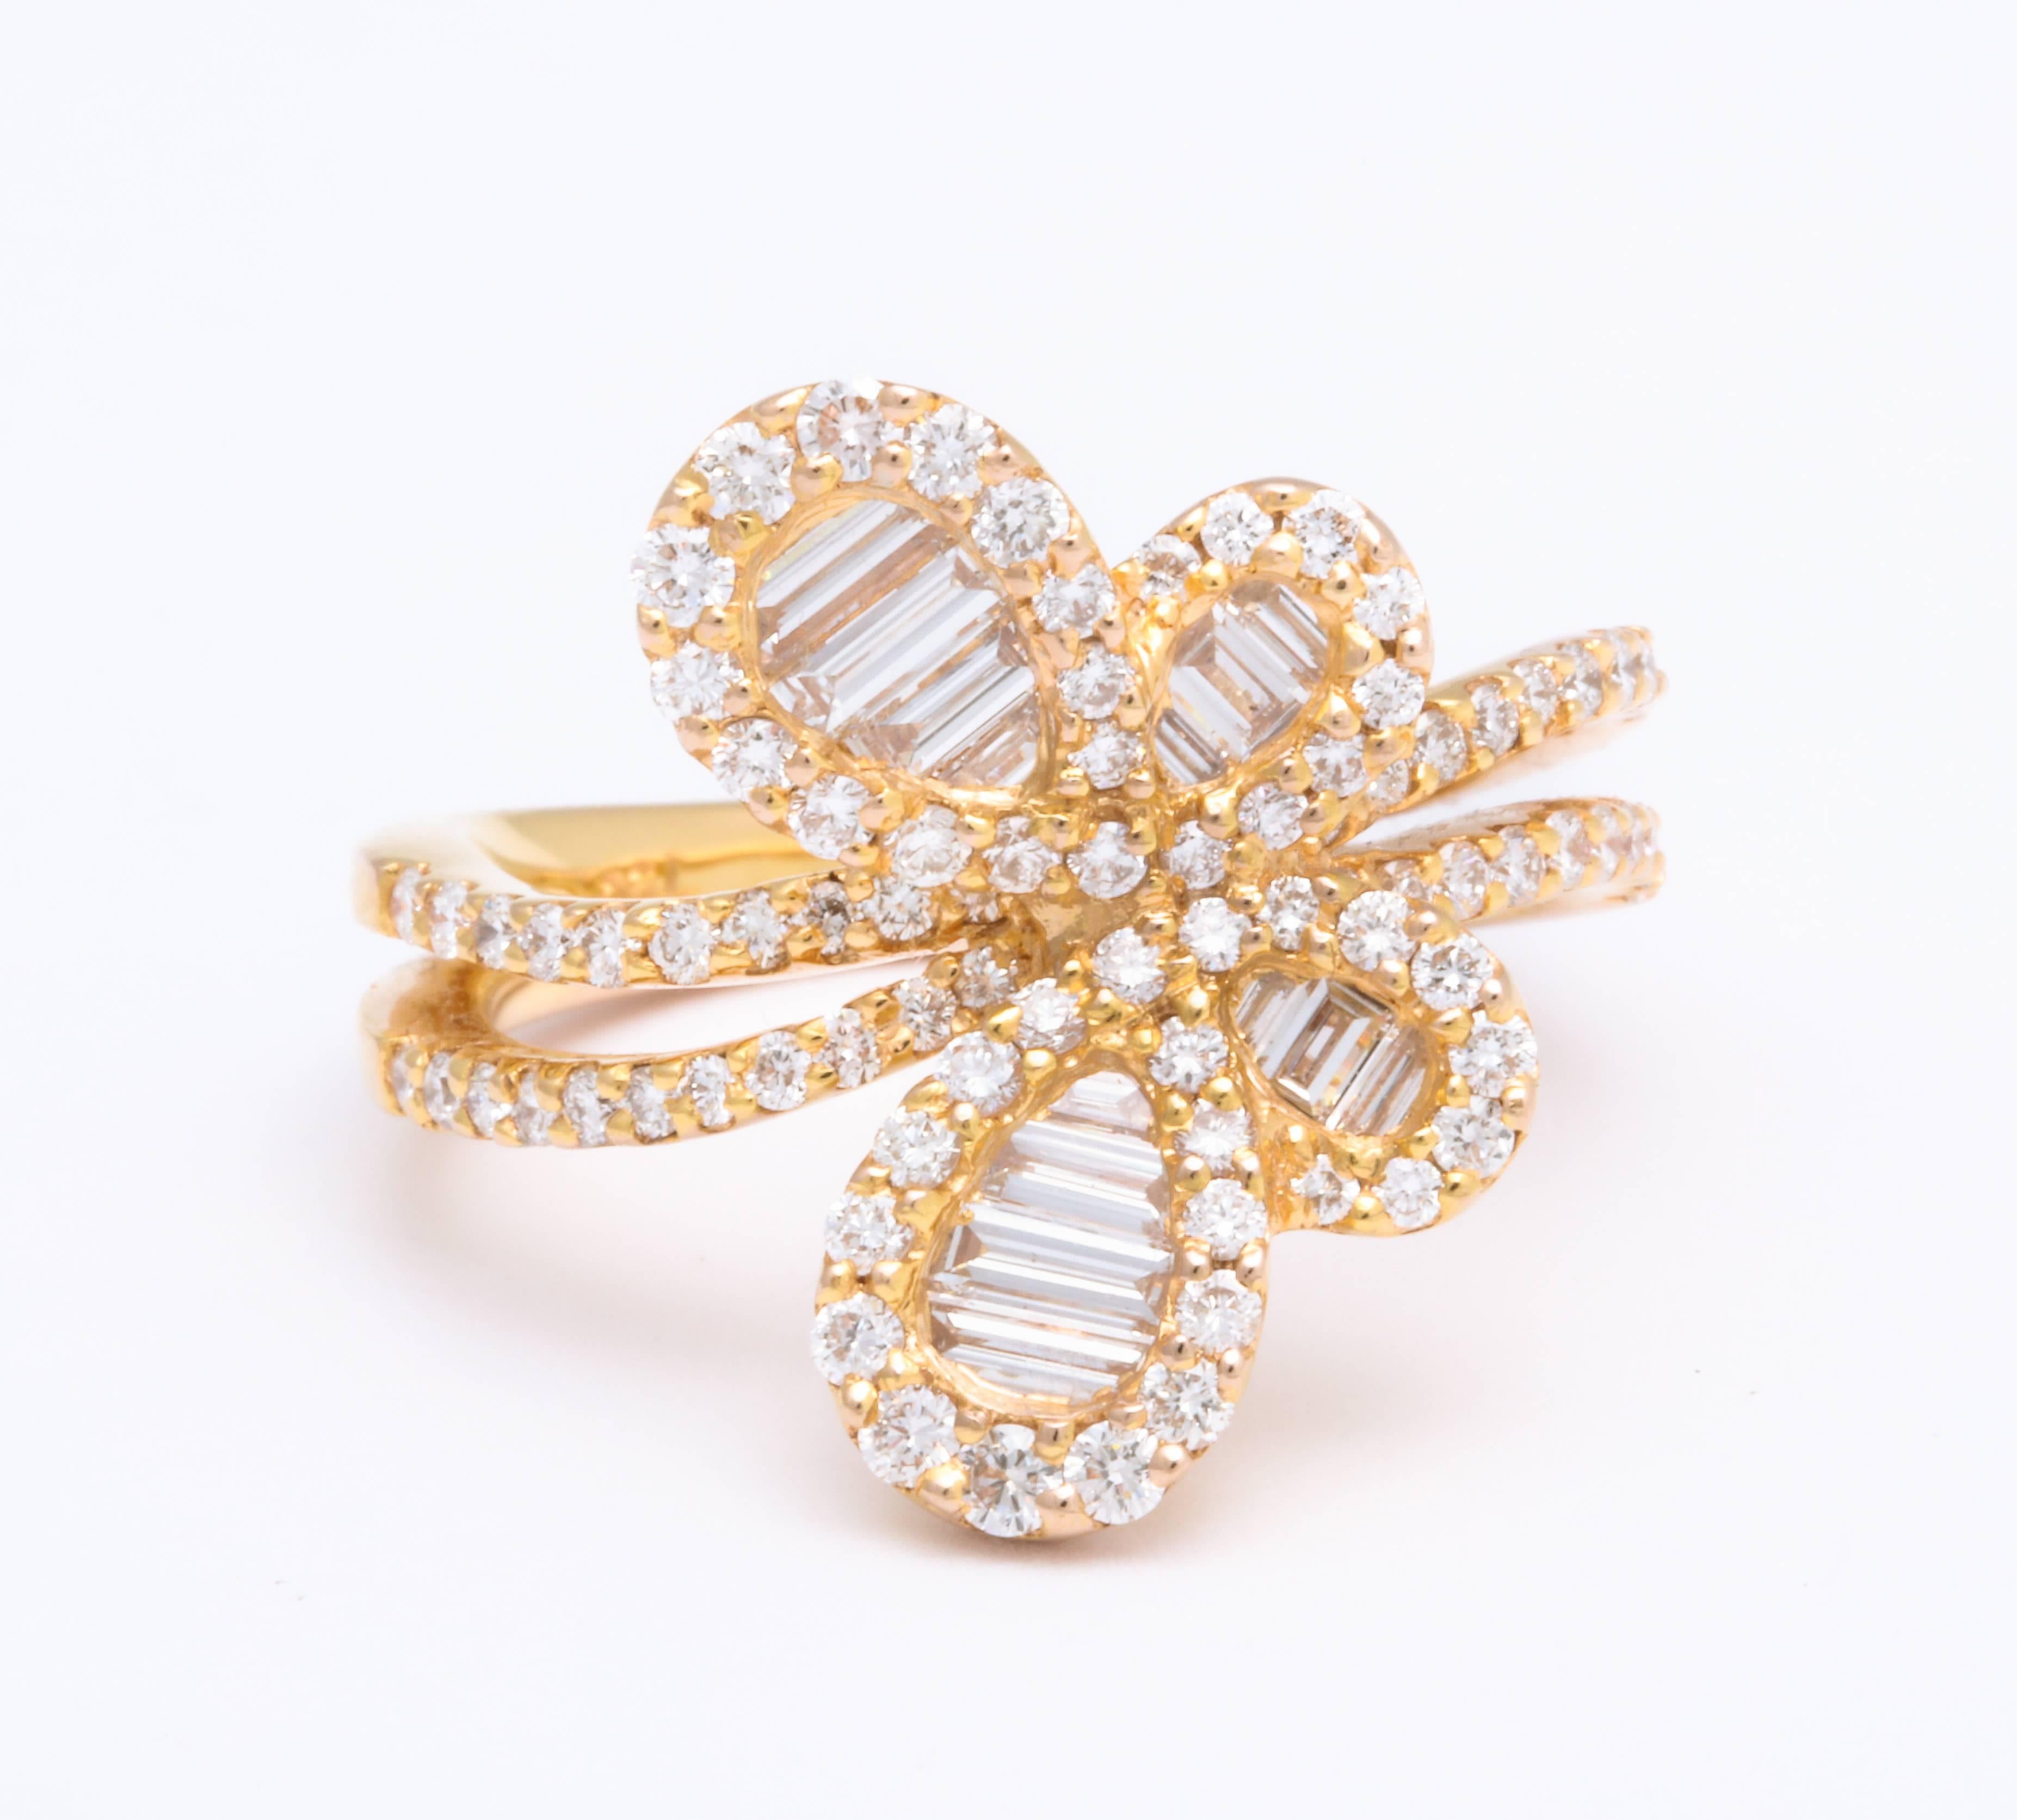 It's all in the details! This beautiful 18 Karat rose gold butterfly ring is decorated with precision-cut baguette diamond wings, round brilliant-cut diamond trim, and double-shank ring: 1.52 carats combined weight. Made to fit a 6.5 finger size but